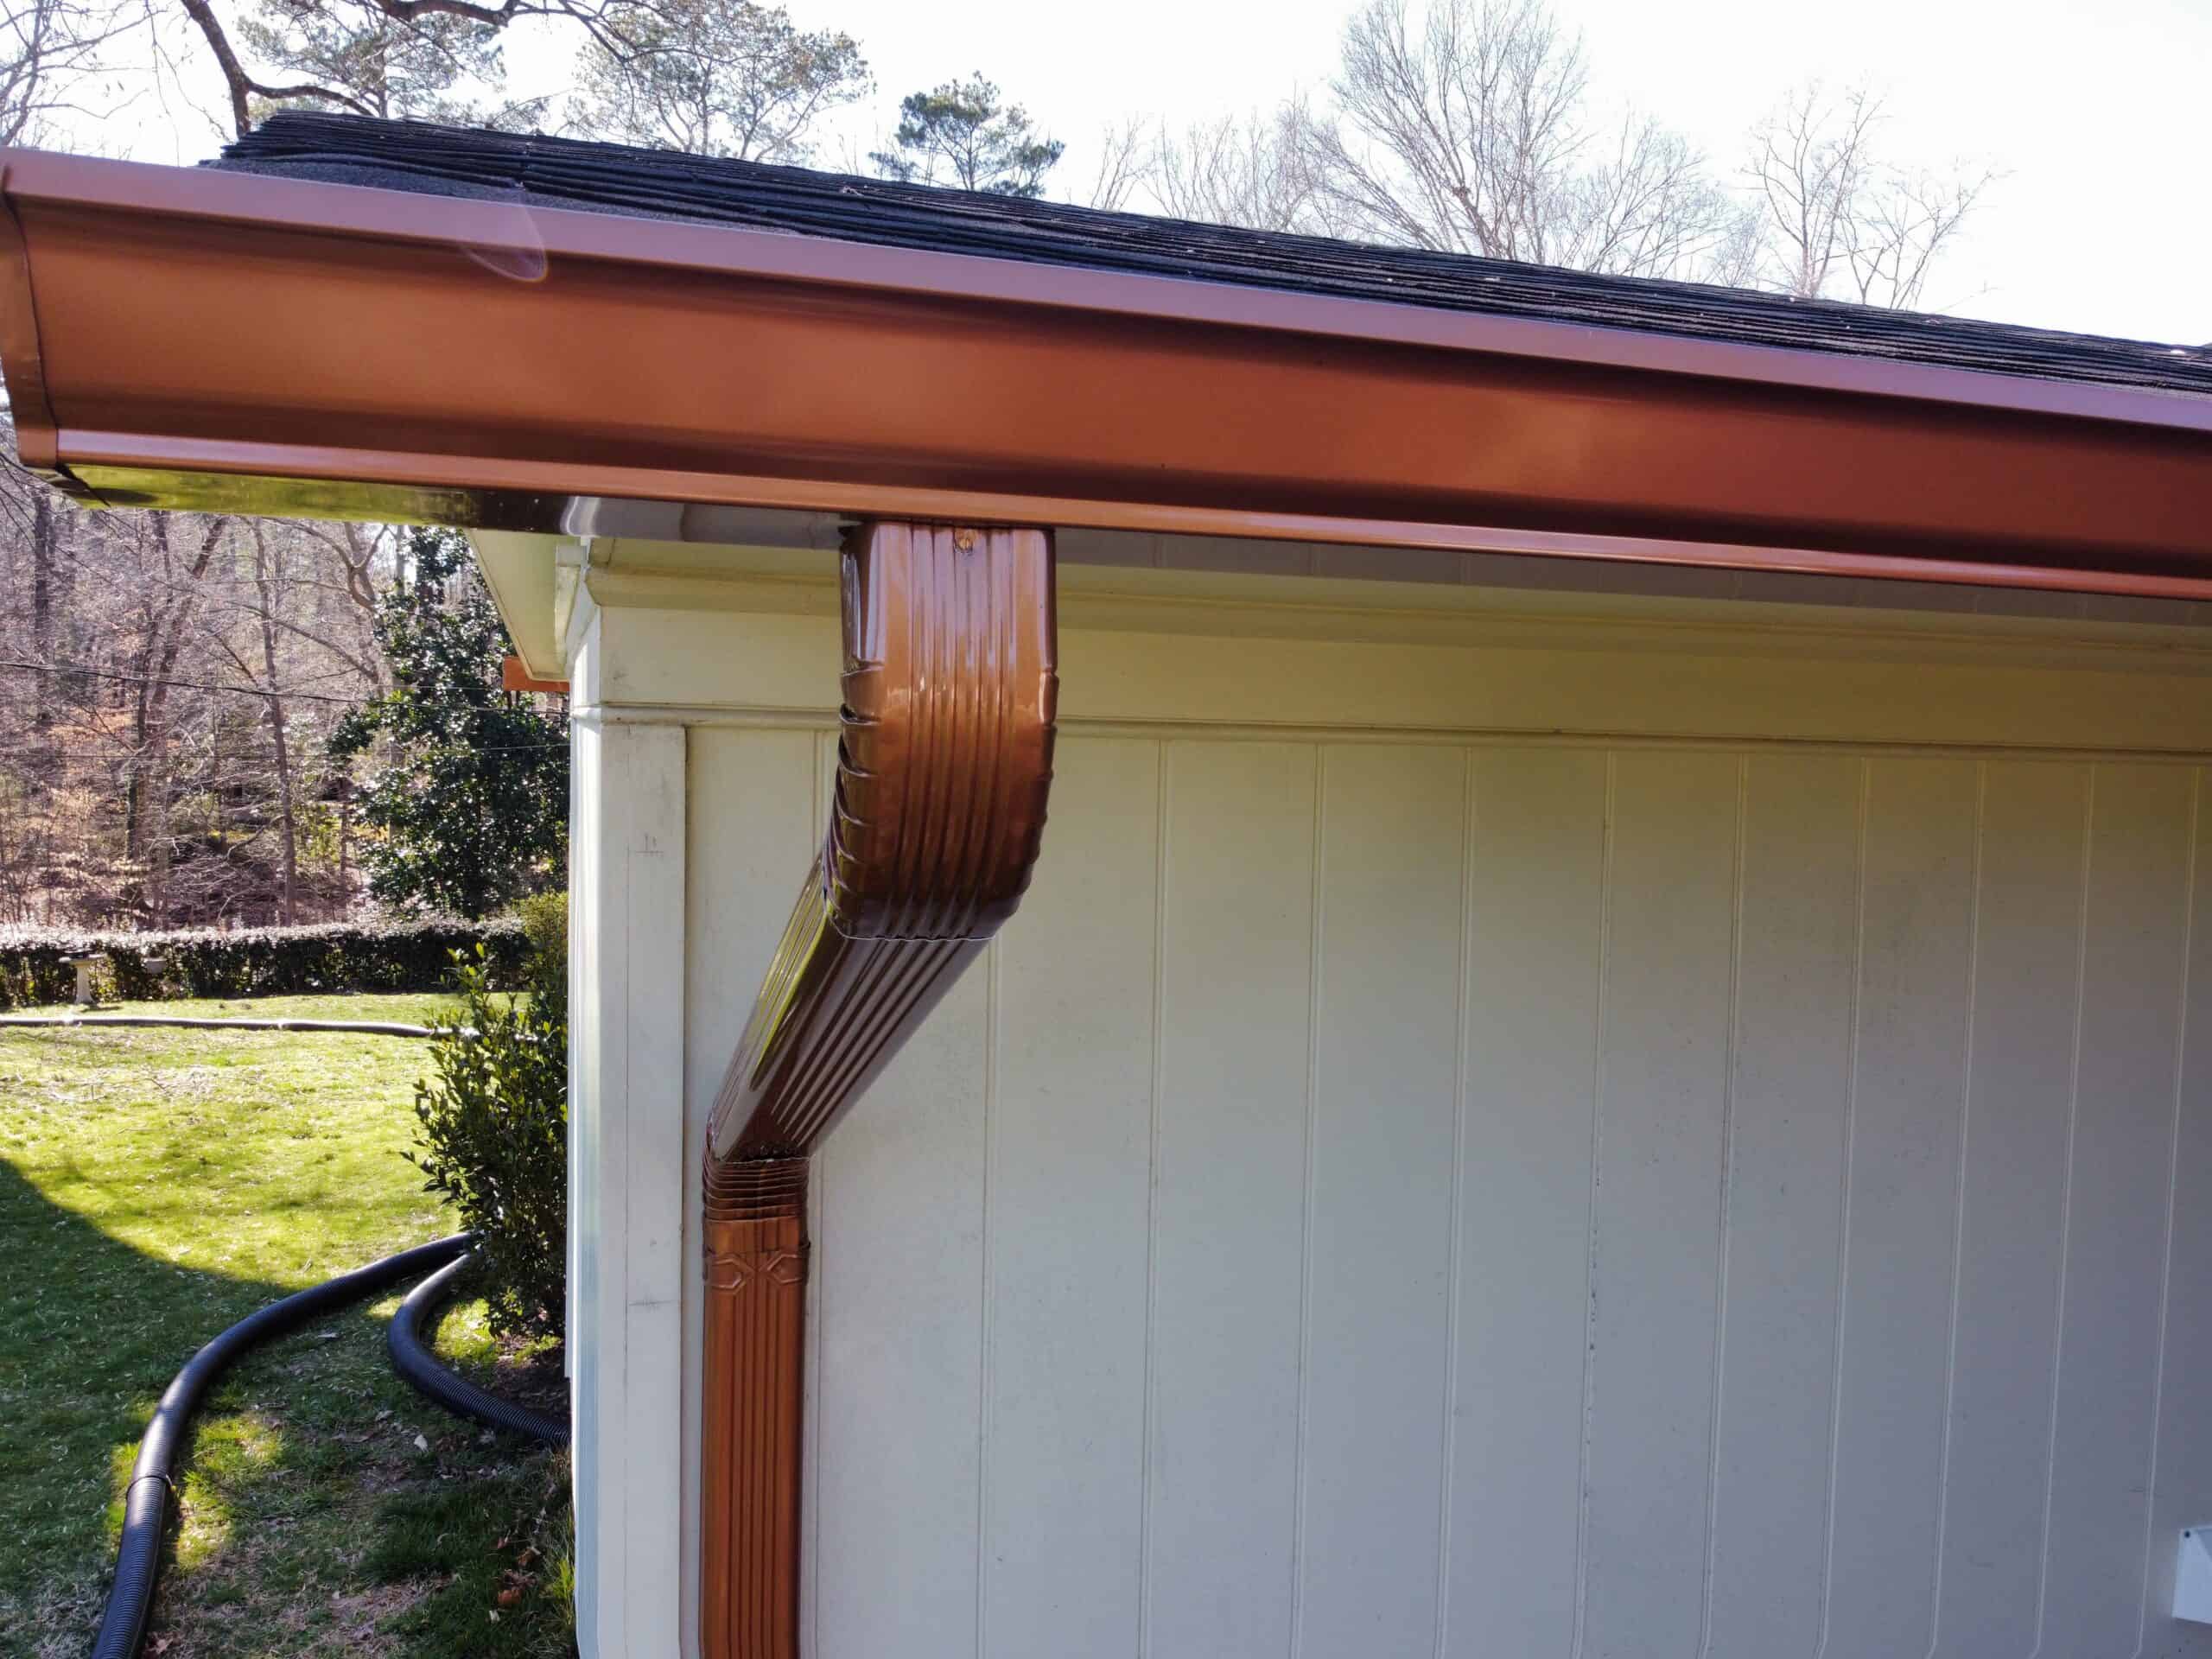 Newly Installed Gutter and Downspout